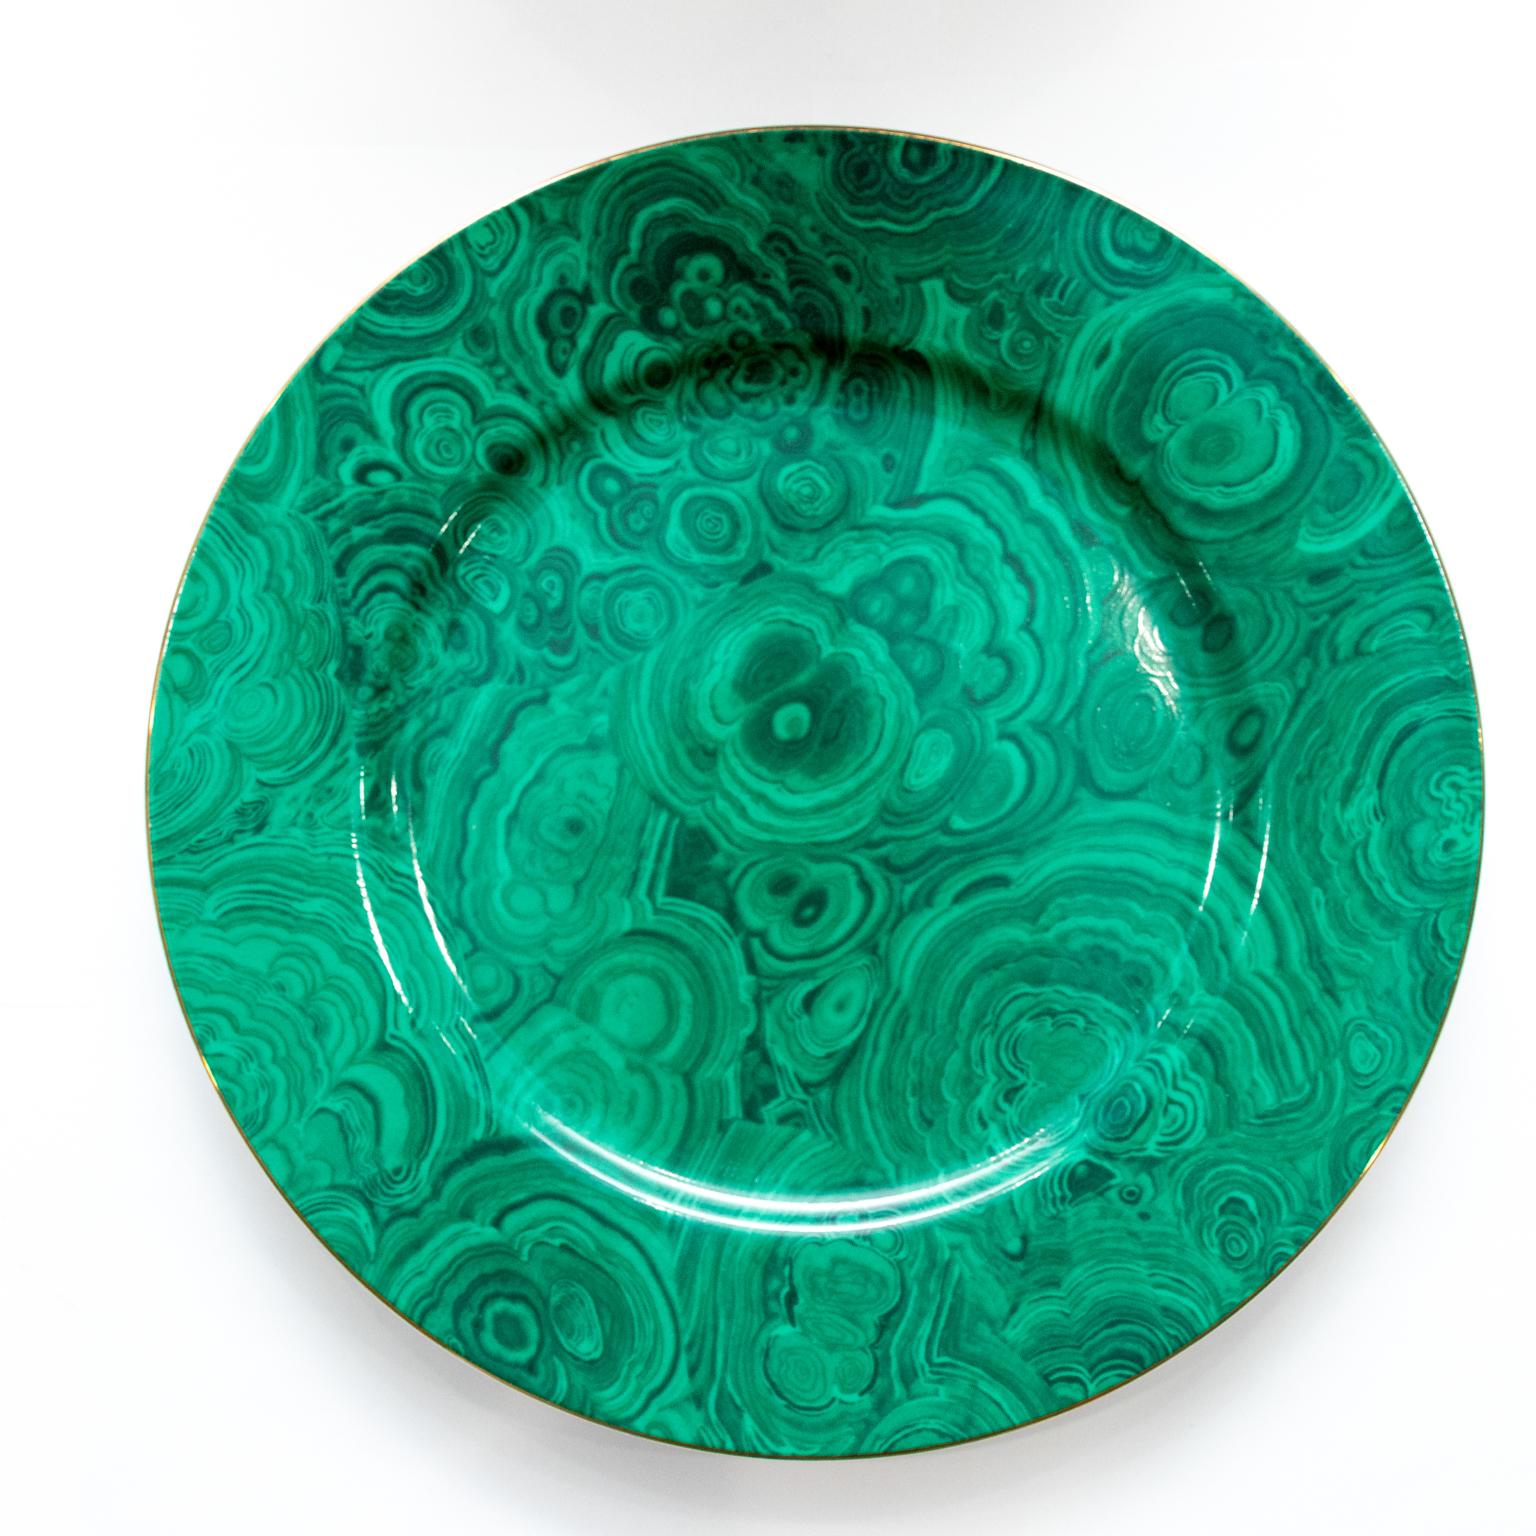 Circa 1970s Neiman Marcus vintage green and gold porcelain faux malachite plate chargers with a gold rim in the Mid-Century Modern style. The pattern has been discontinued and is a sought-after product collection. Please note of wear consistent with